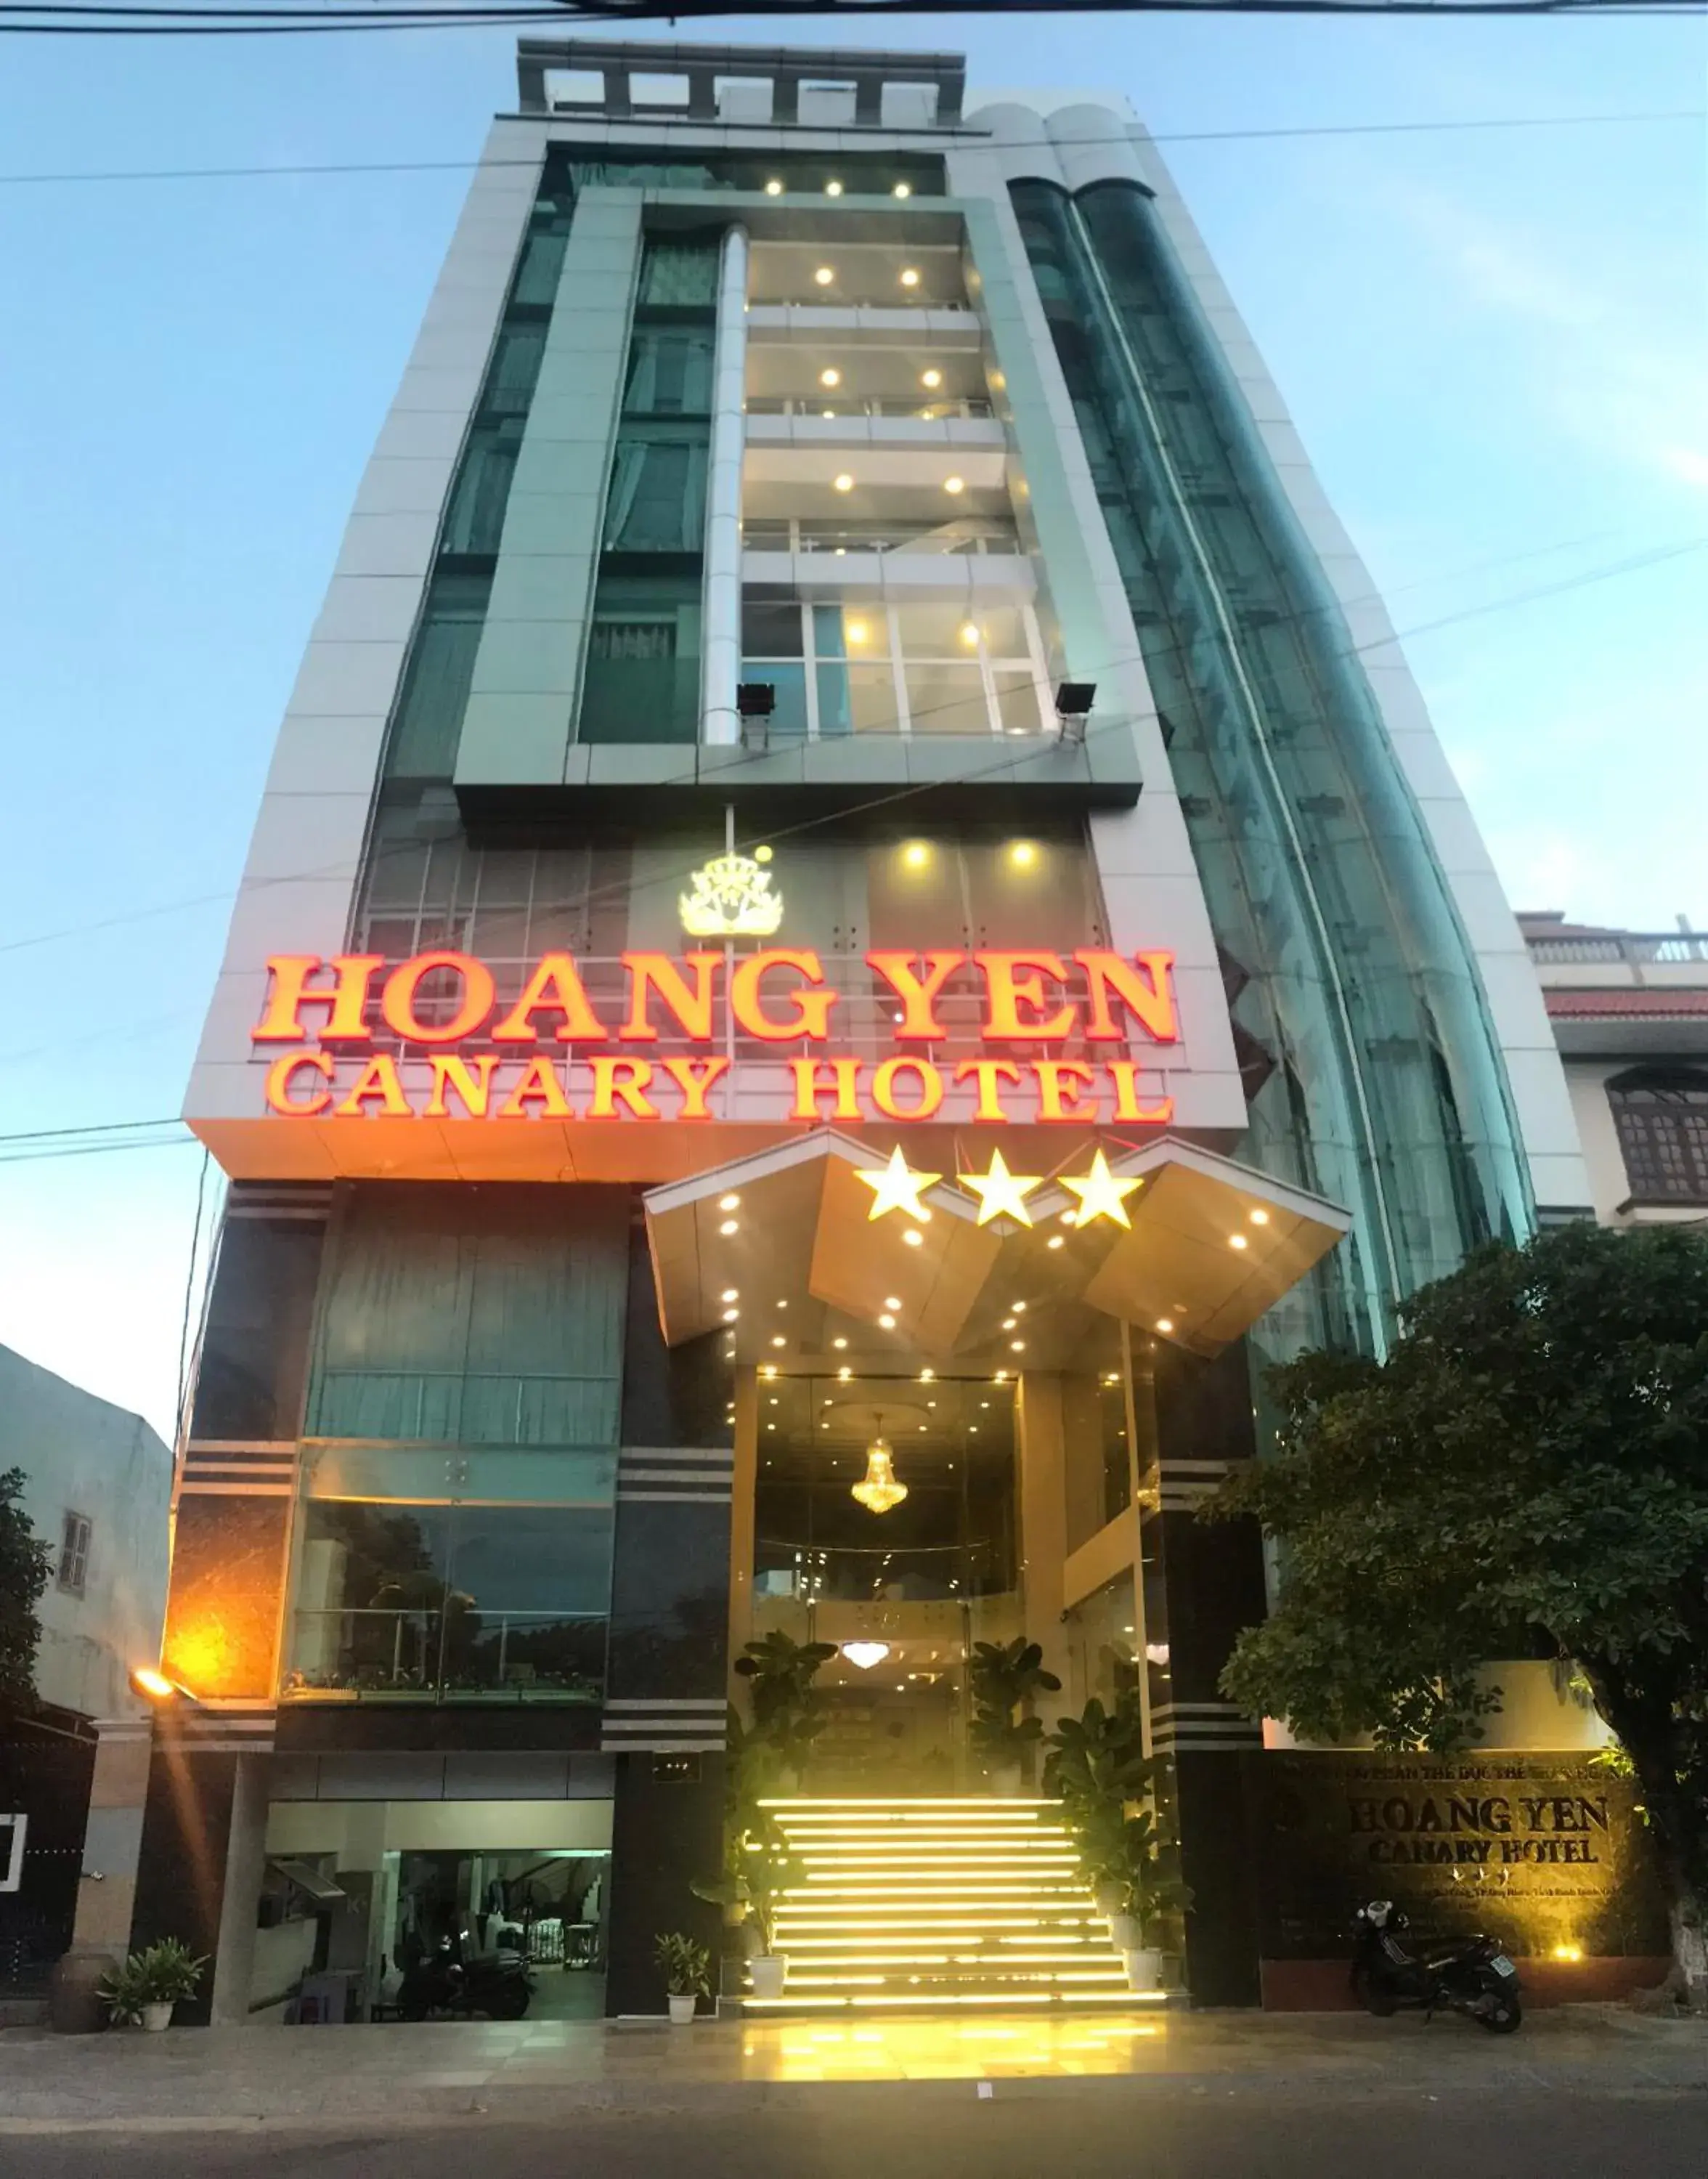 Property Building in Hoang Yen Canary Hotel